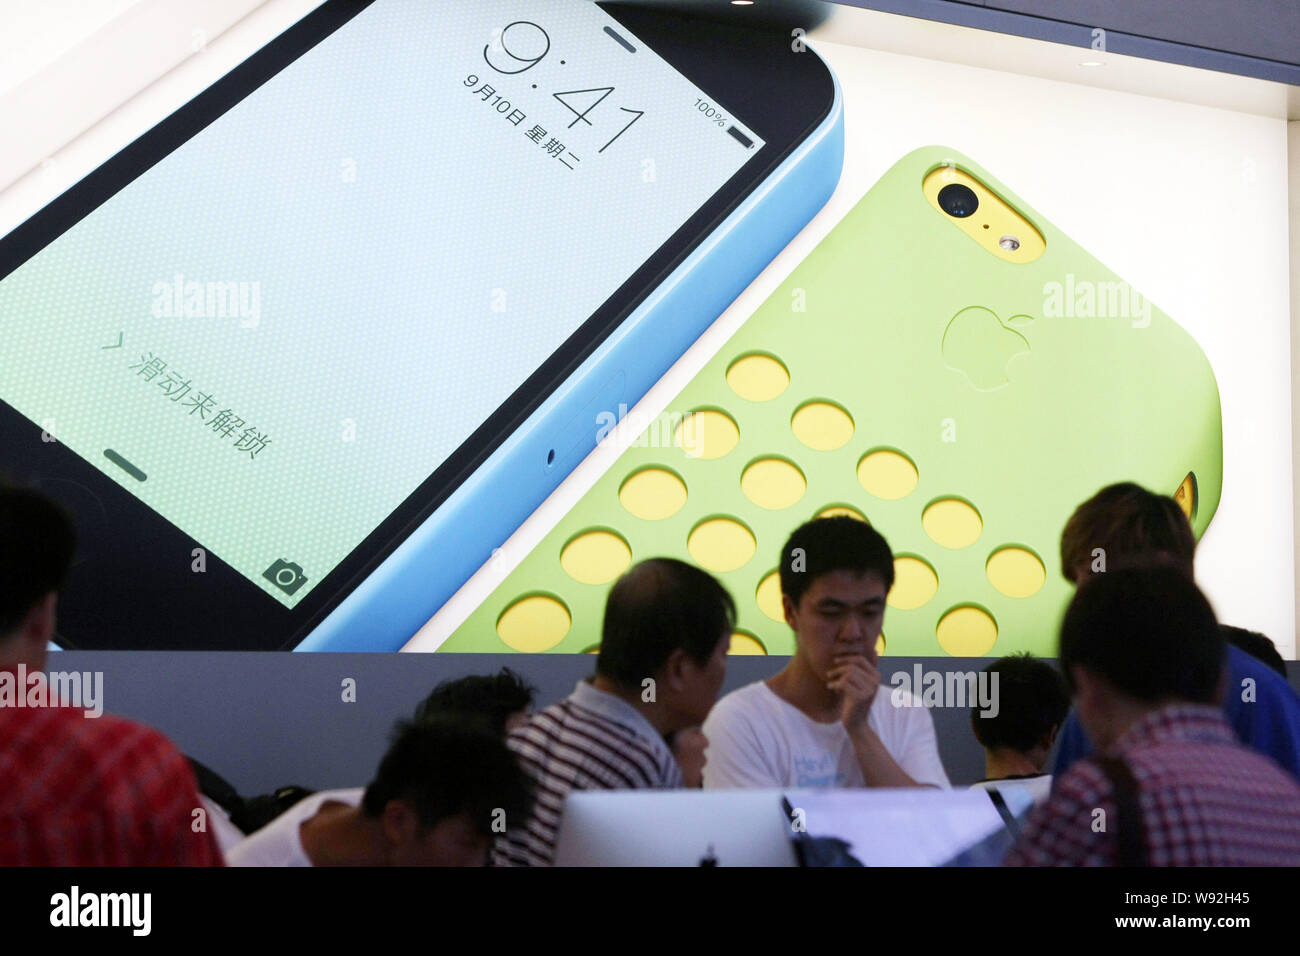 An advertisement for new iPhone 5c smartphones of Apple is seen at an Apple store in Shanghai, China, 20 September 2013.   Apple Inc. (AAPL) attracted Stock Photo